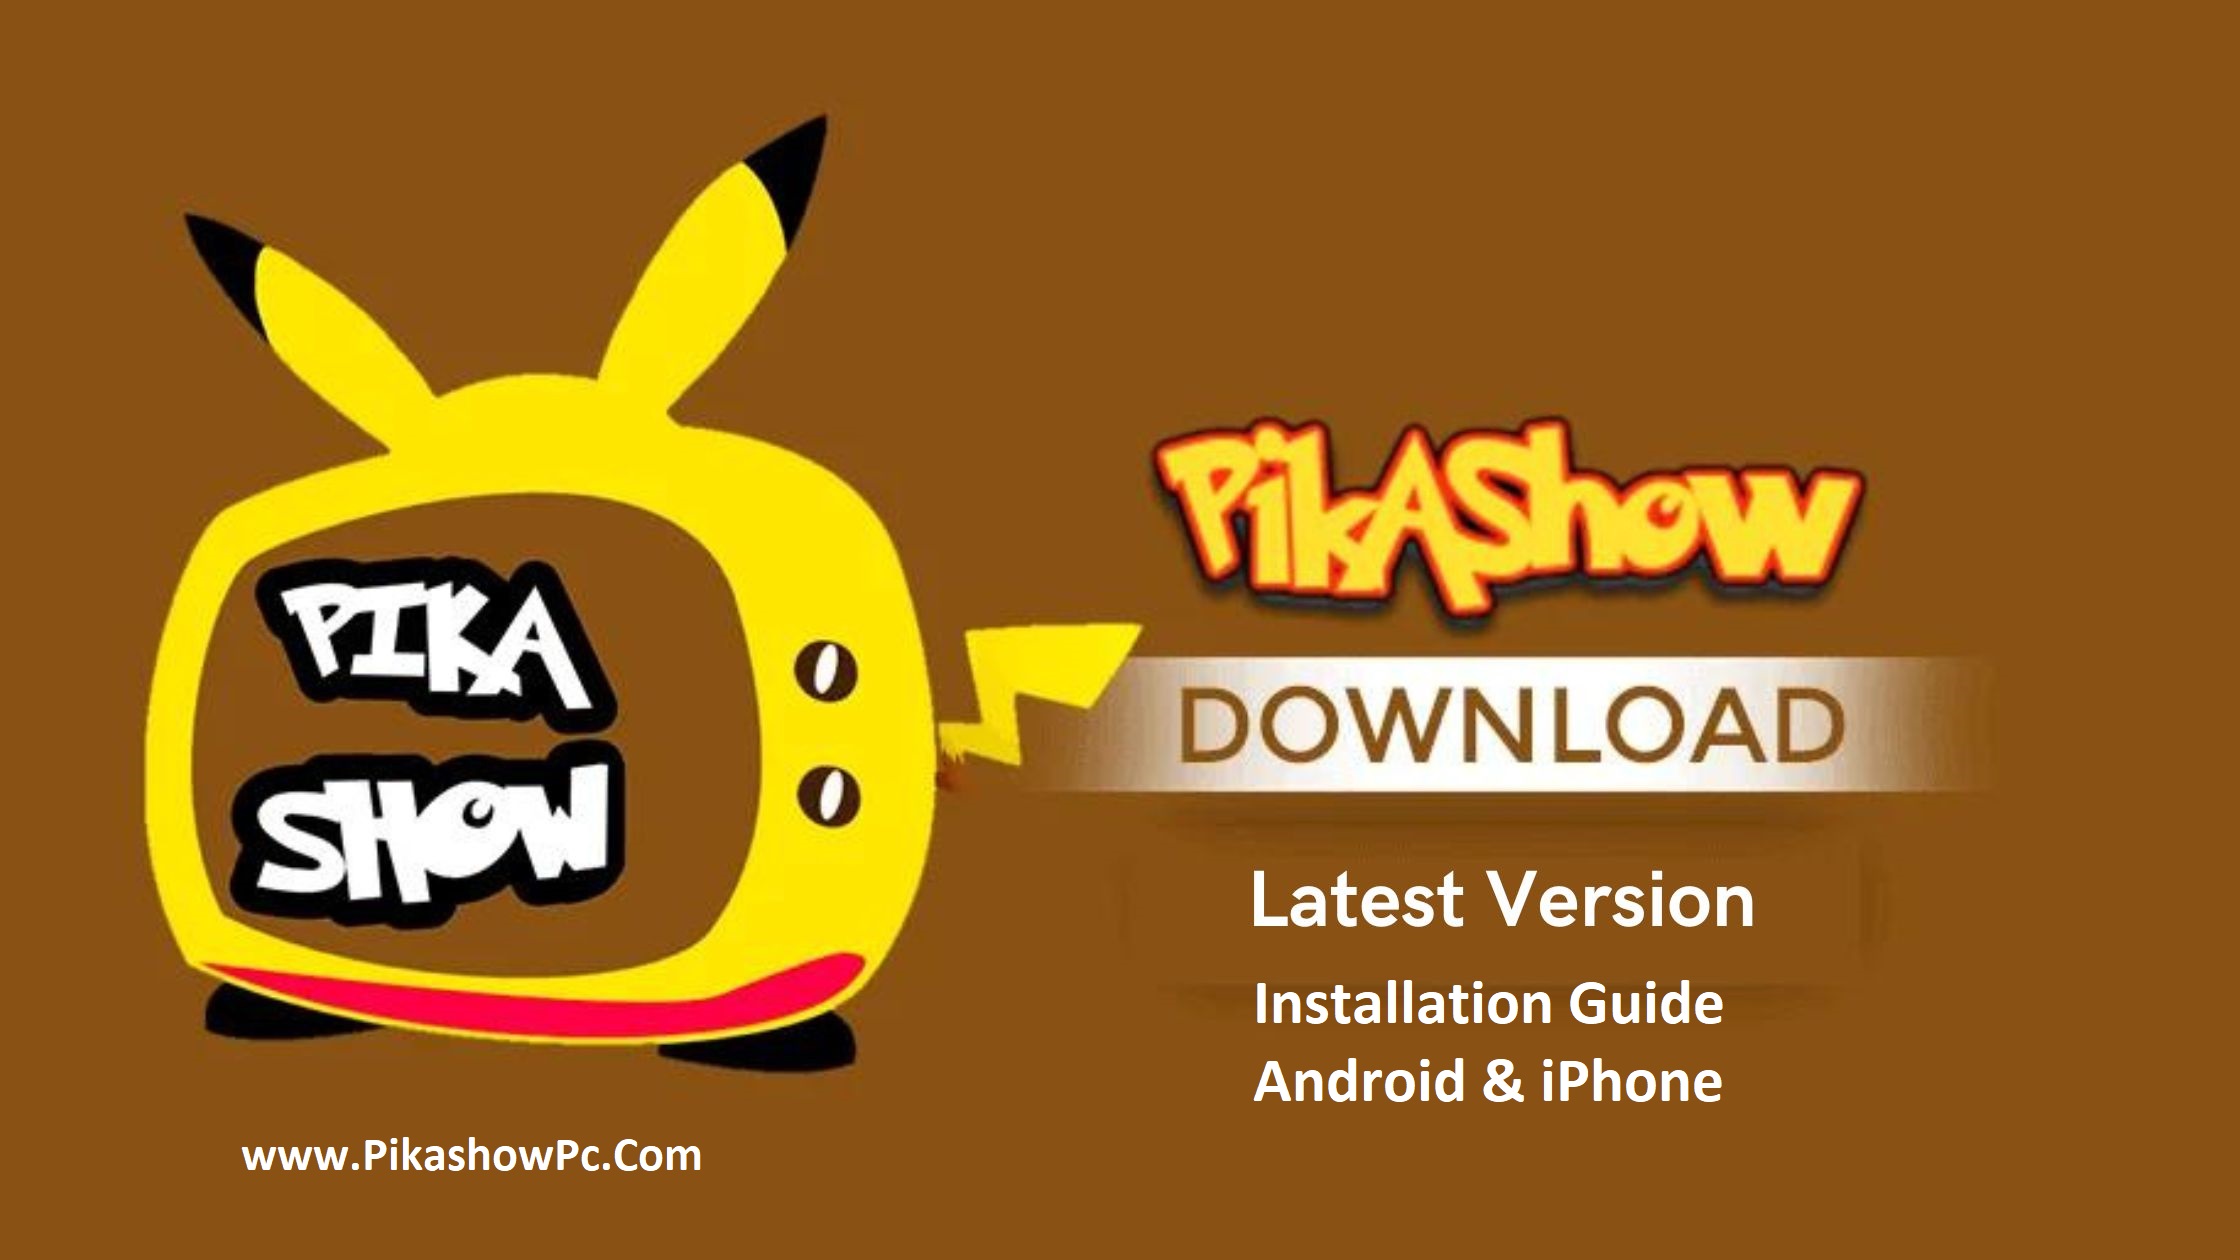 Download & Install Pikashow APK on Android and iphone step by step guide